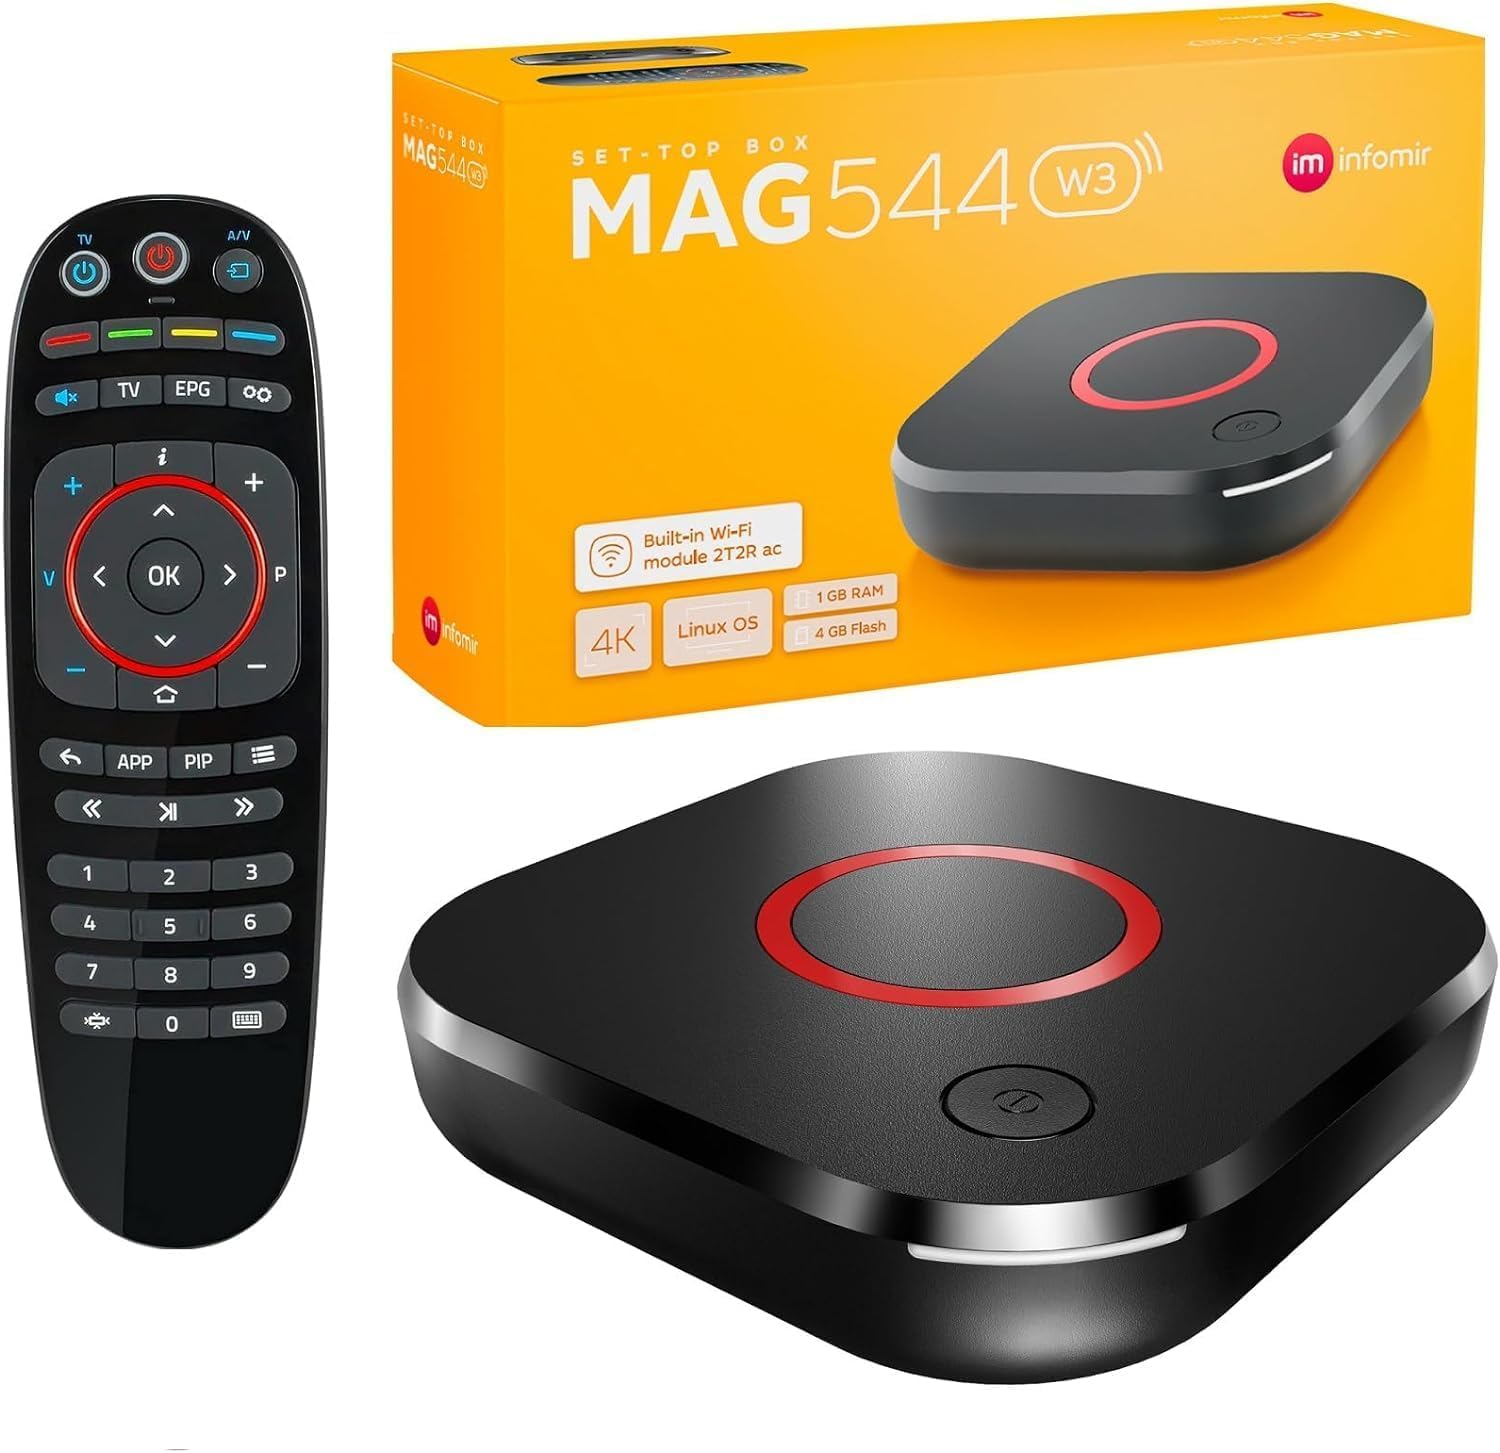 Infomir Original MAG 544 W3 4K Set Top Box Multimedia Player Internet TV Receiver 2160p @ 60 FPS HDMI 2.1 HDR and HEVC Support USB 3.0 4X ARM Cortex-A35 + HDMI Cable, Much Faster Than Mag 524w3